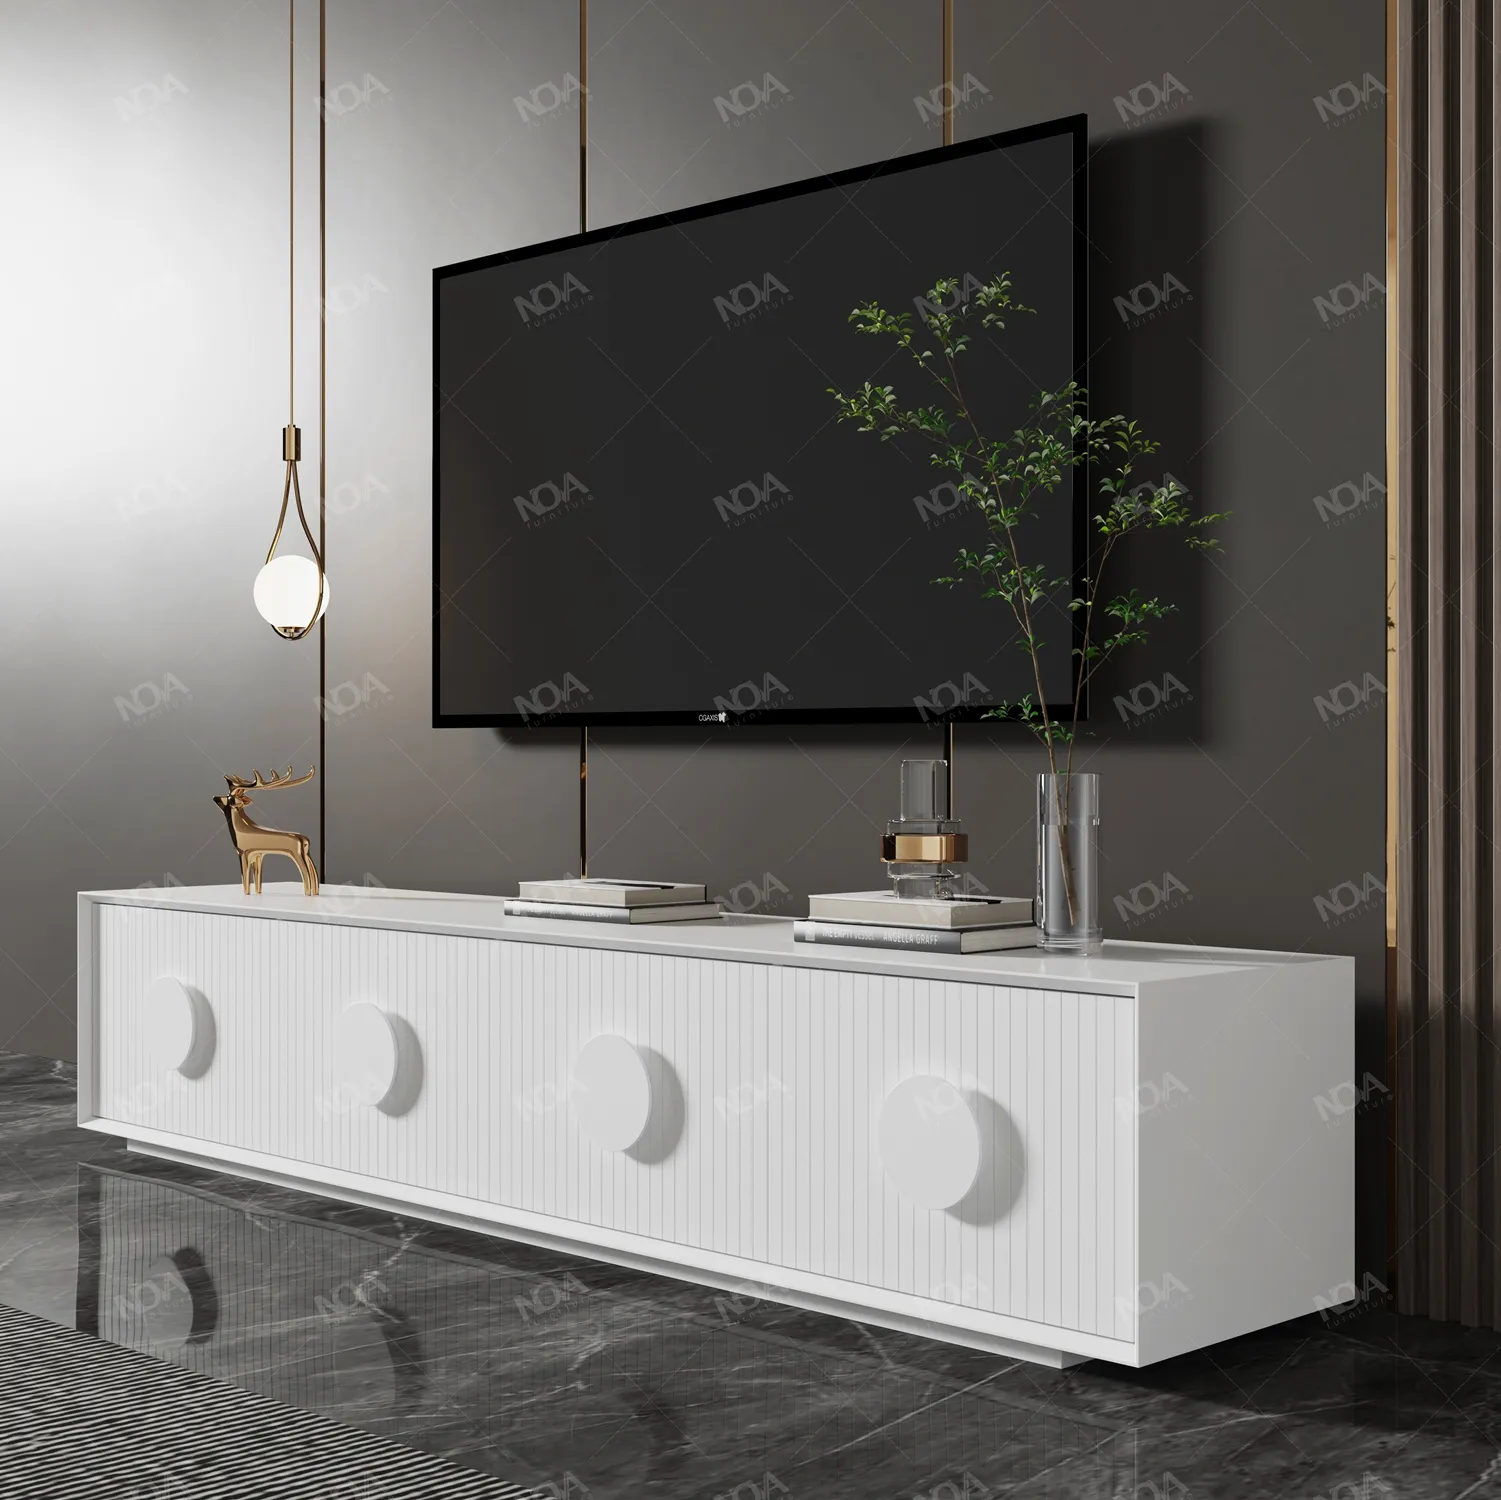 NOVA Factory Sells New Modern Living Room Furniture White Wooden TV Stand Cabinet Living Room Media Console TV Cabinet